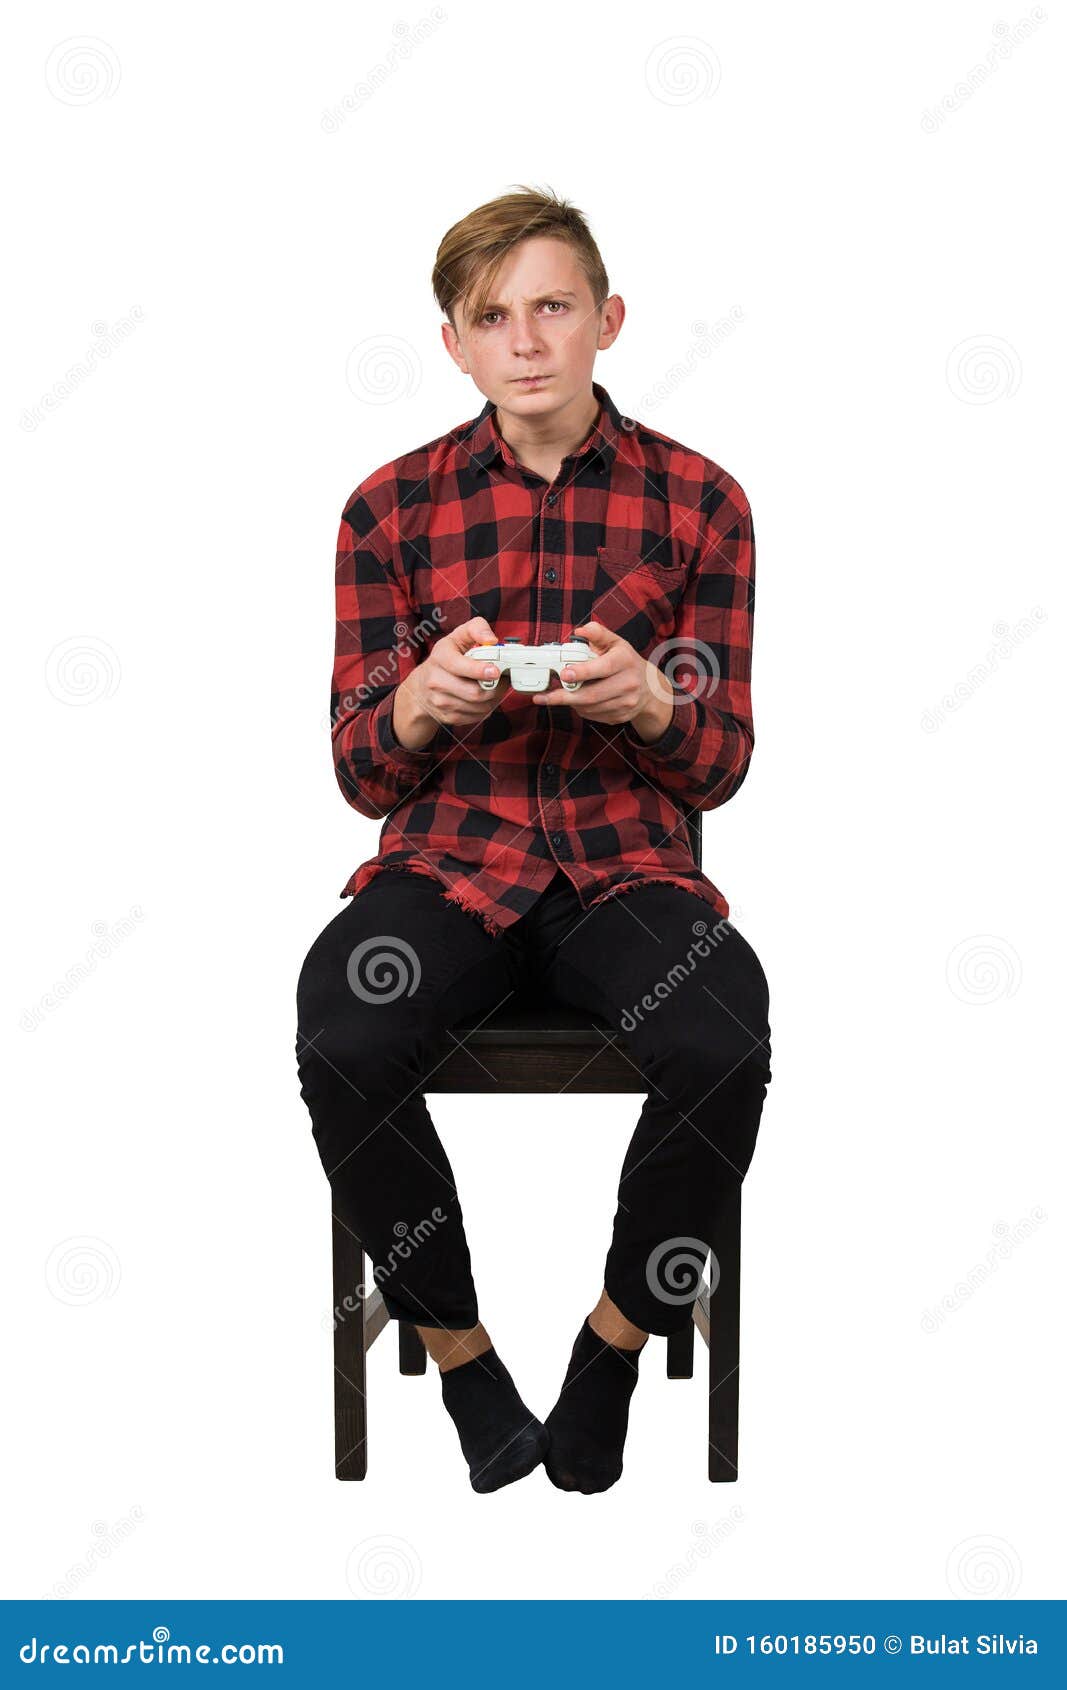 serious intent teen guy seated on chair playing video games  over white background. boy stand all ears holding joystick